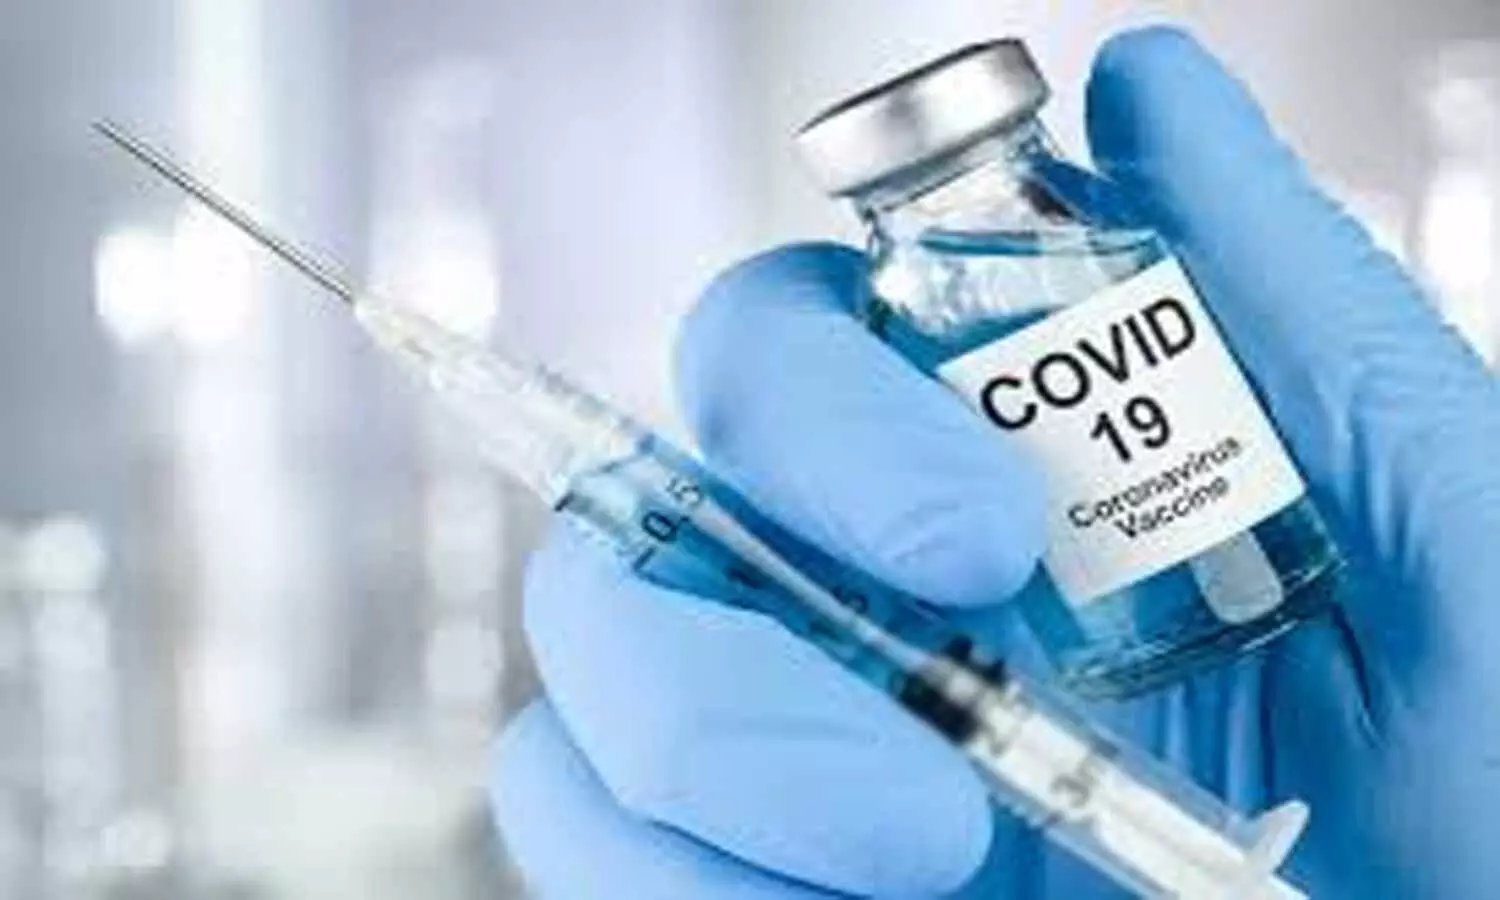 KIMS, BMCRI chosen for video conference with PM Modi during Covid-19 vaccination launch event